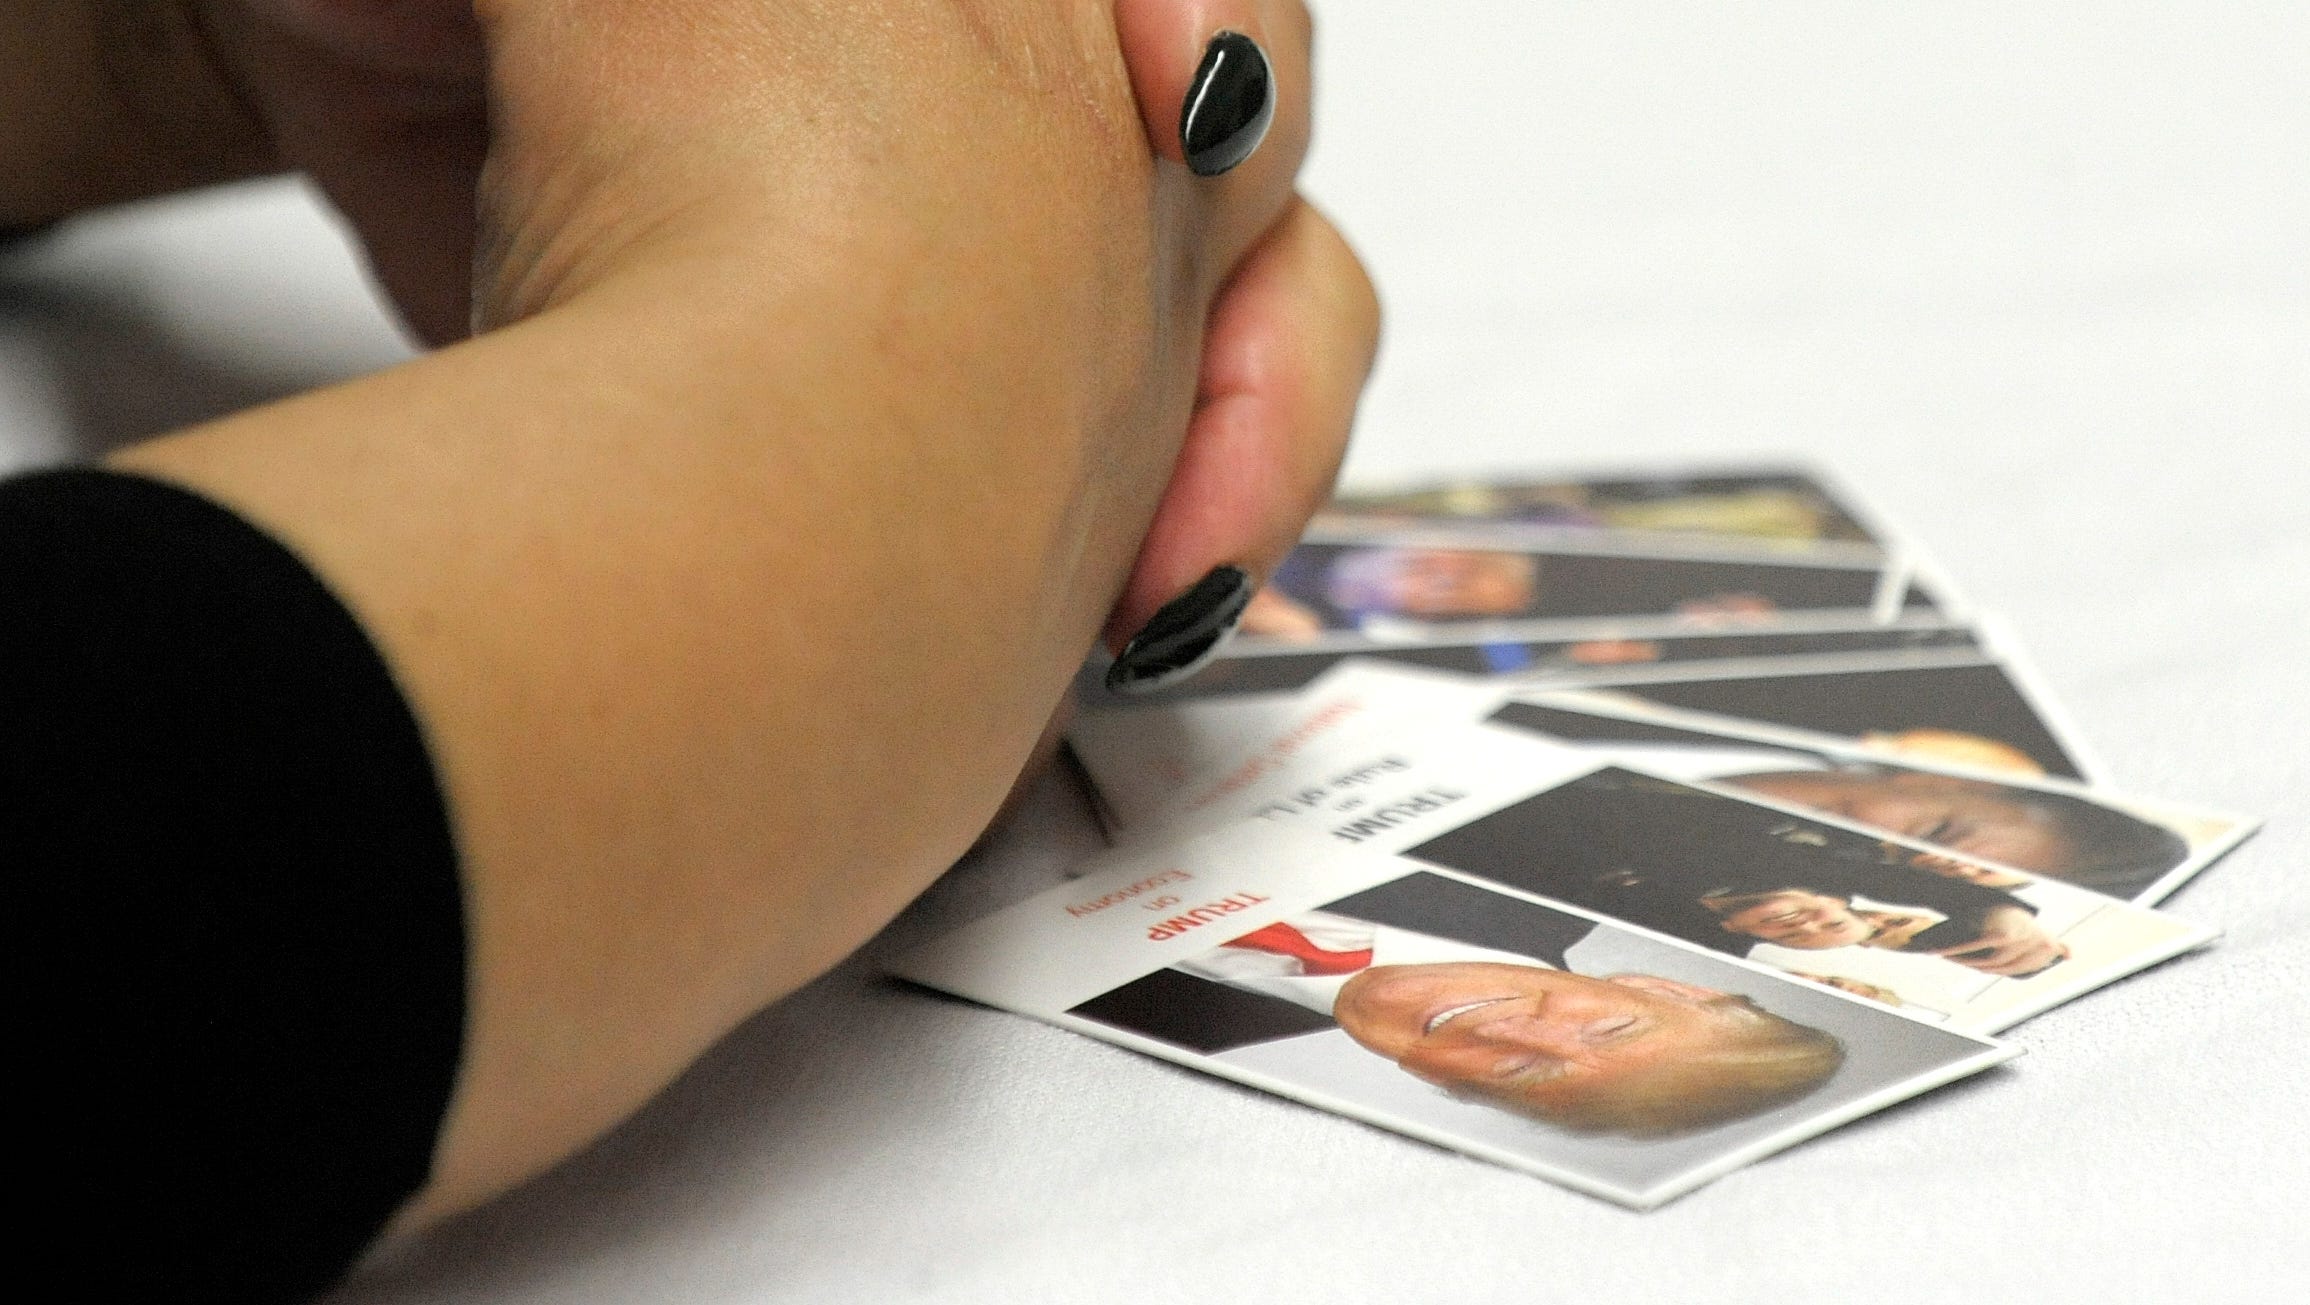 A woman folds her hands as she listens to Donald Trump, Jr. with pictured cards on the table, including, a card of Donald Trump.